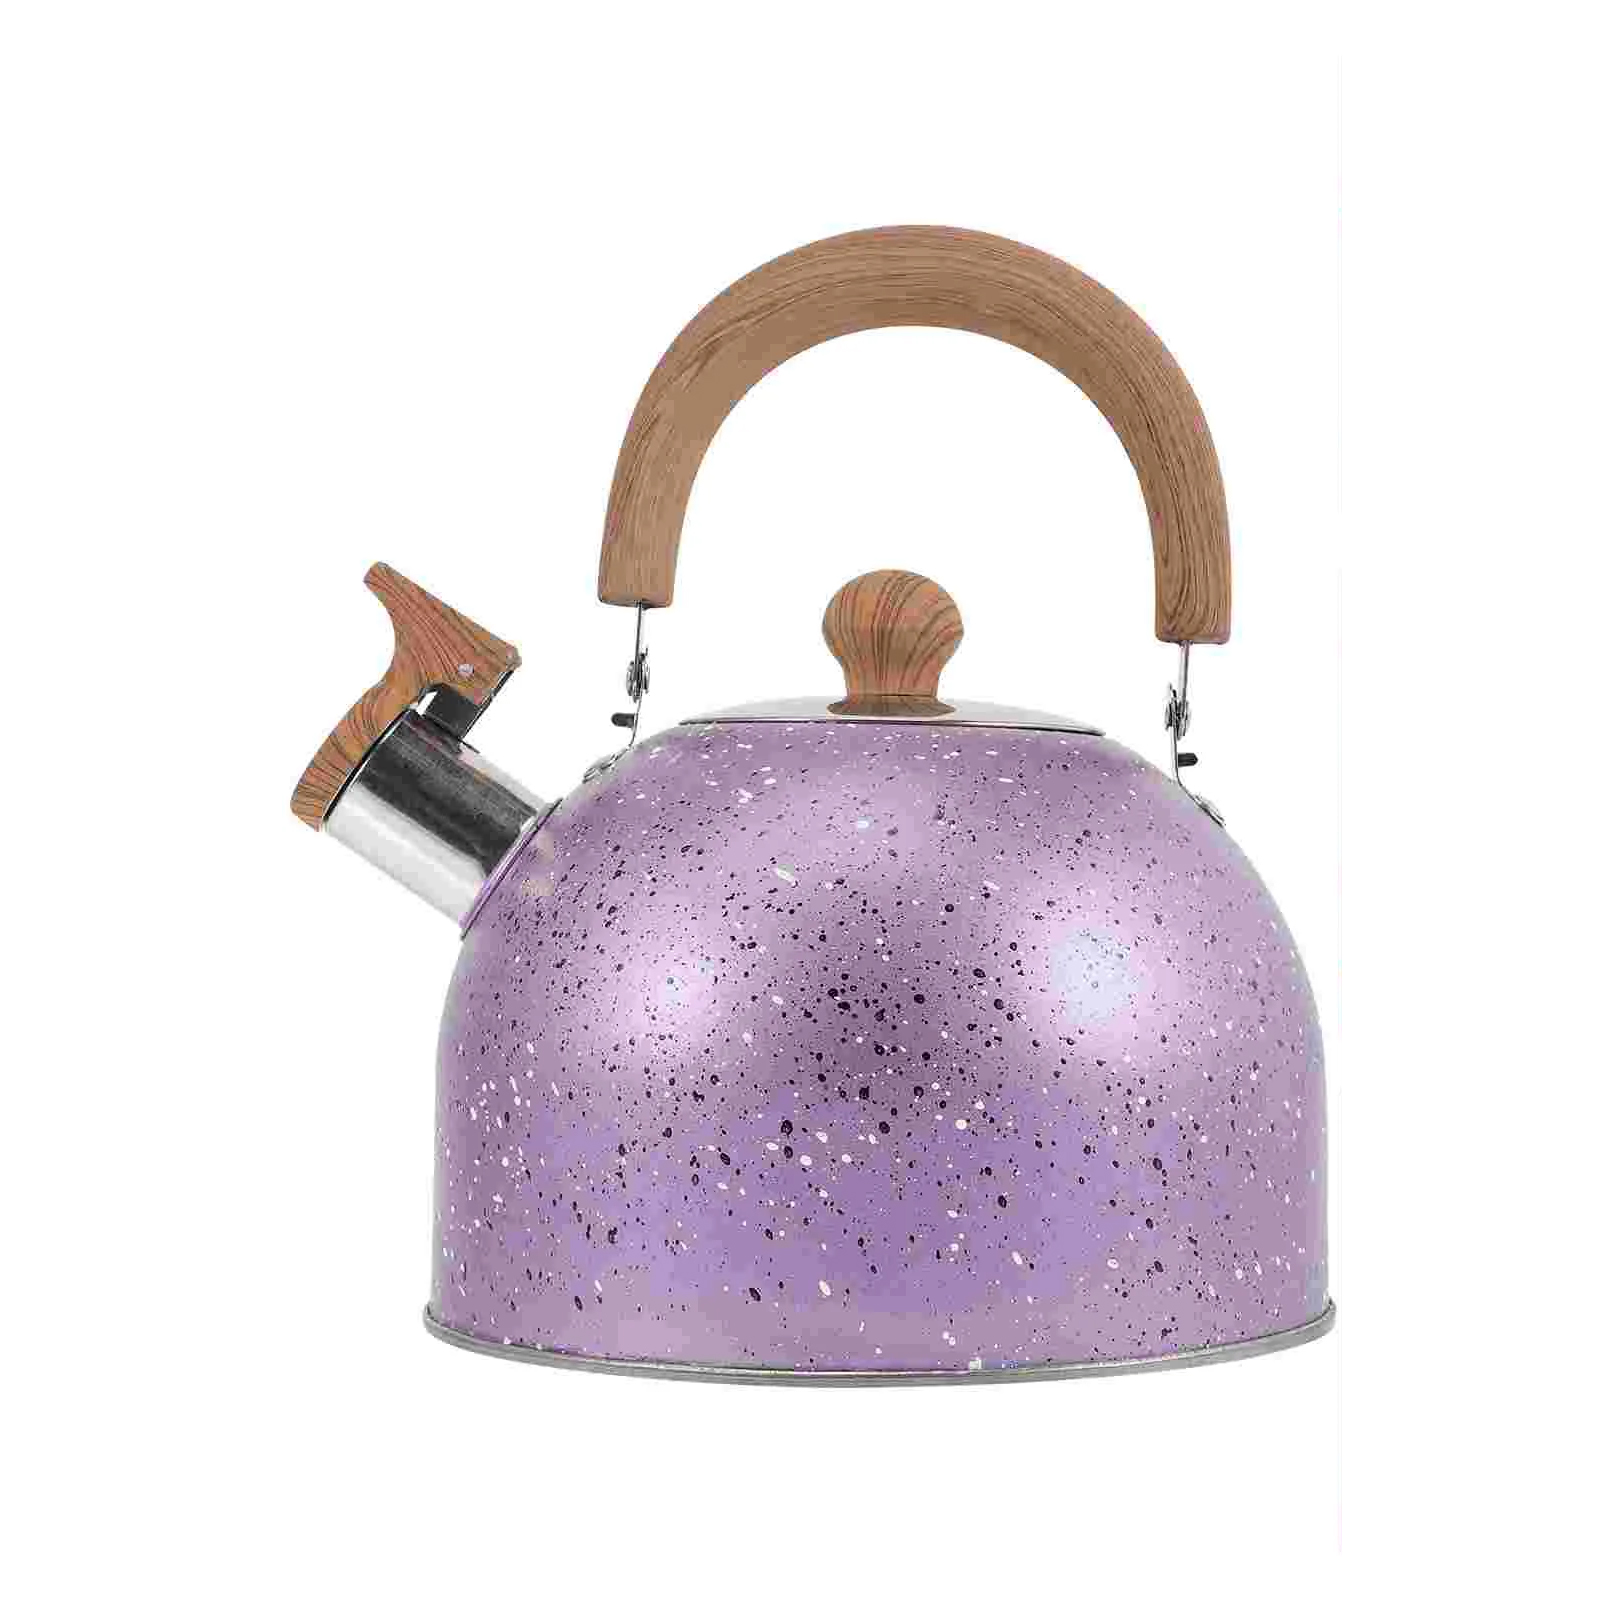 Camping Tea Kettle Water Gas Stove Kettle Convenient Practical Boiling Purple Stainless Steel Metal Make